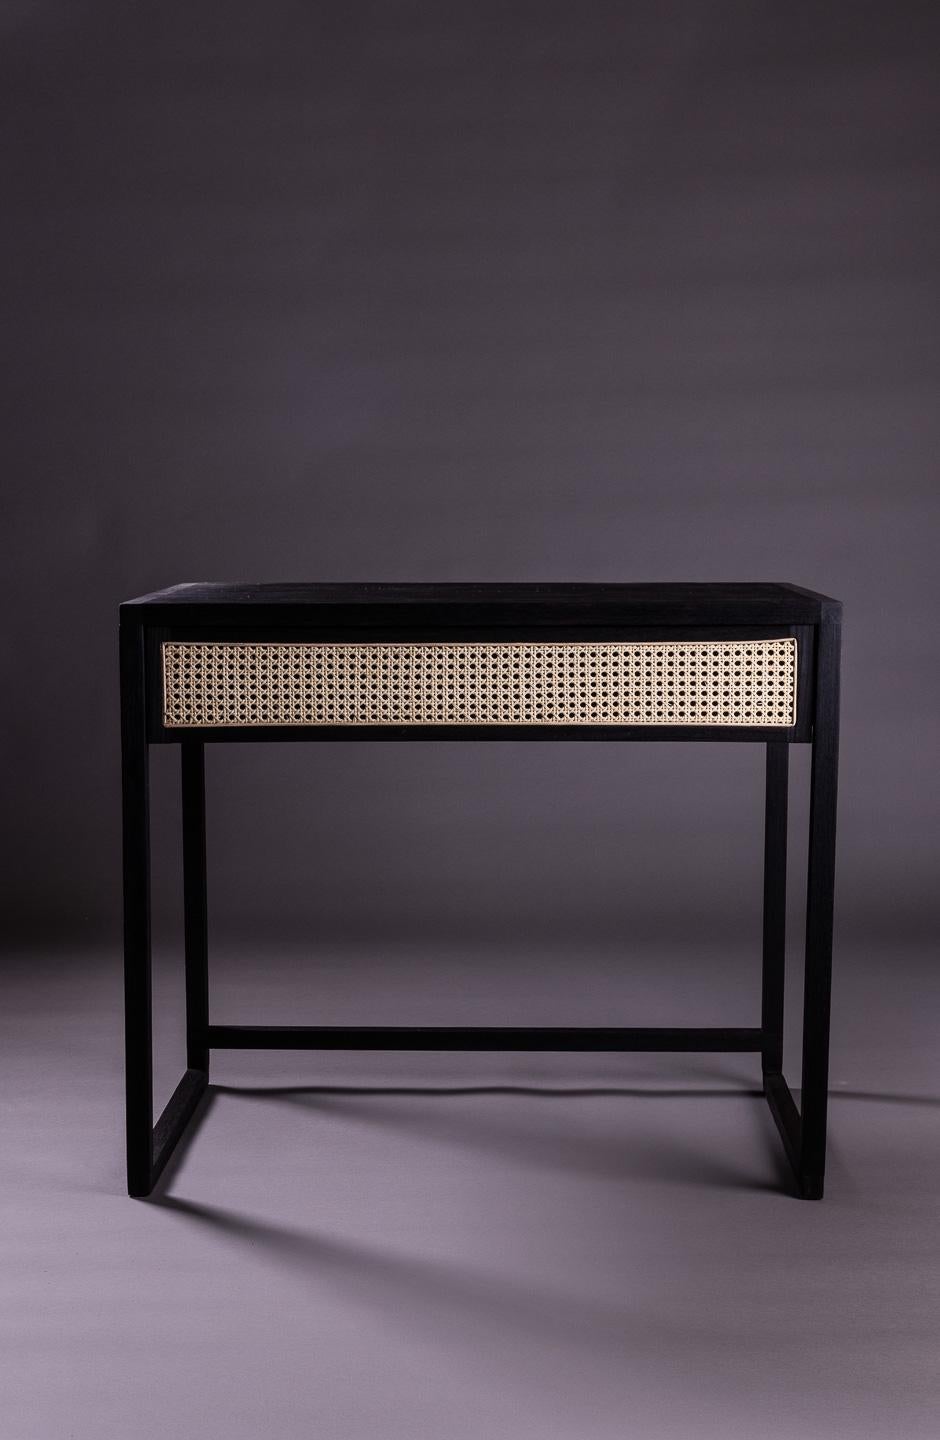 The Square Desk was inspired by the design of Brazilian modern furniture from the 1950s and 1960s, featuring straight lines and Indian straw weaving. It's delicate and highly comfortable for everyday use, seamlessly blending functionality and